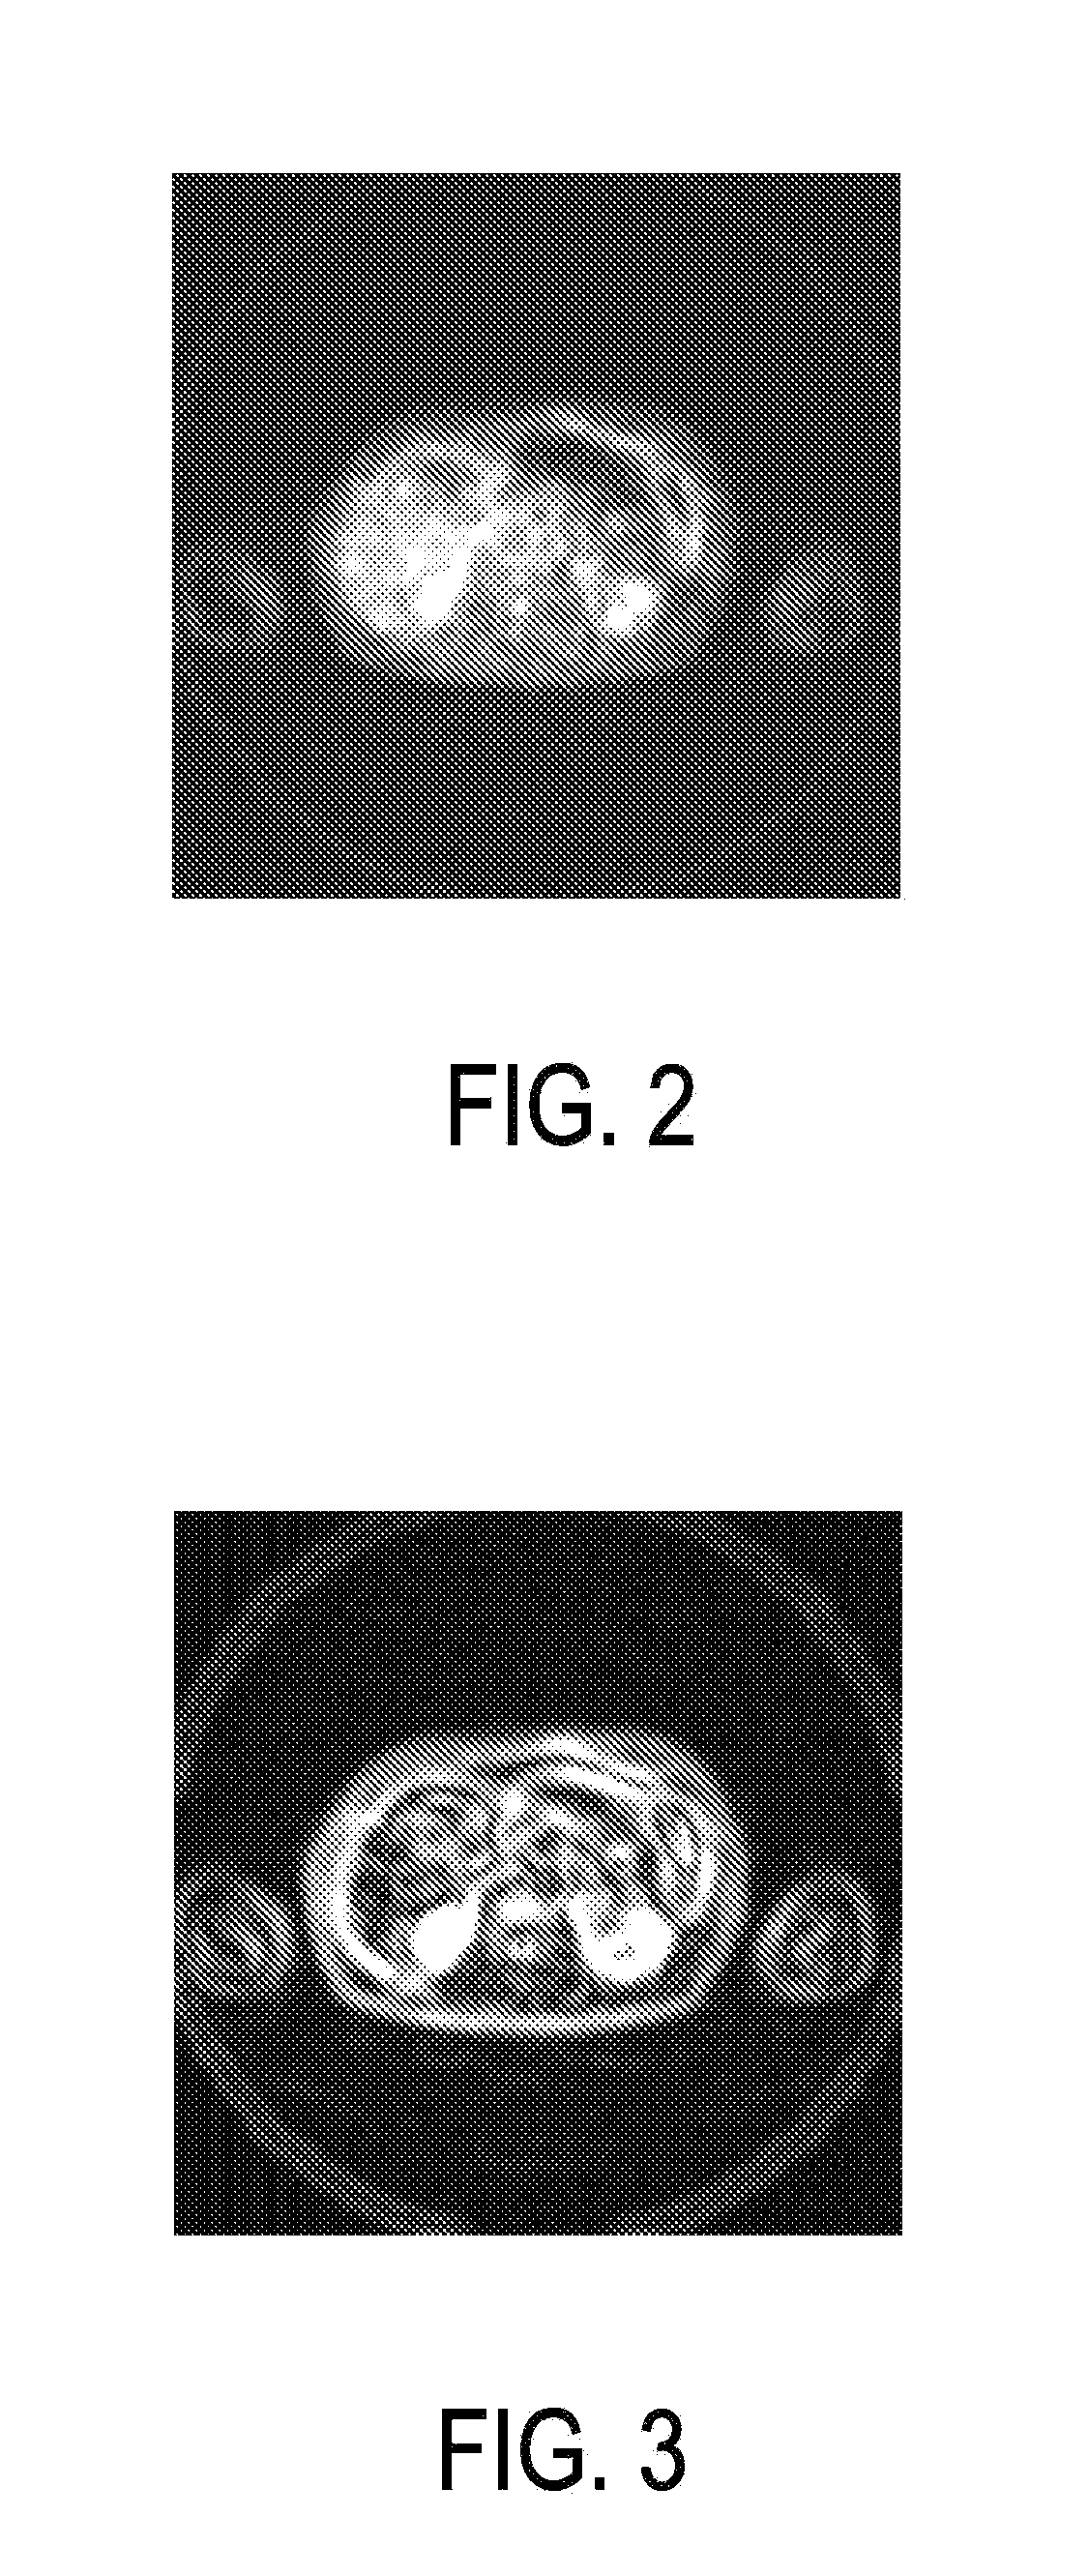 Apparatus for generating assignments between image regions of an image and element classes